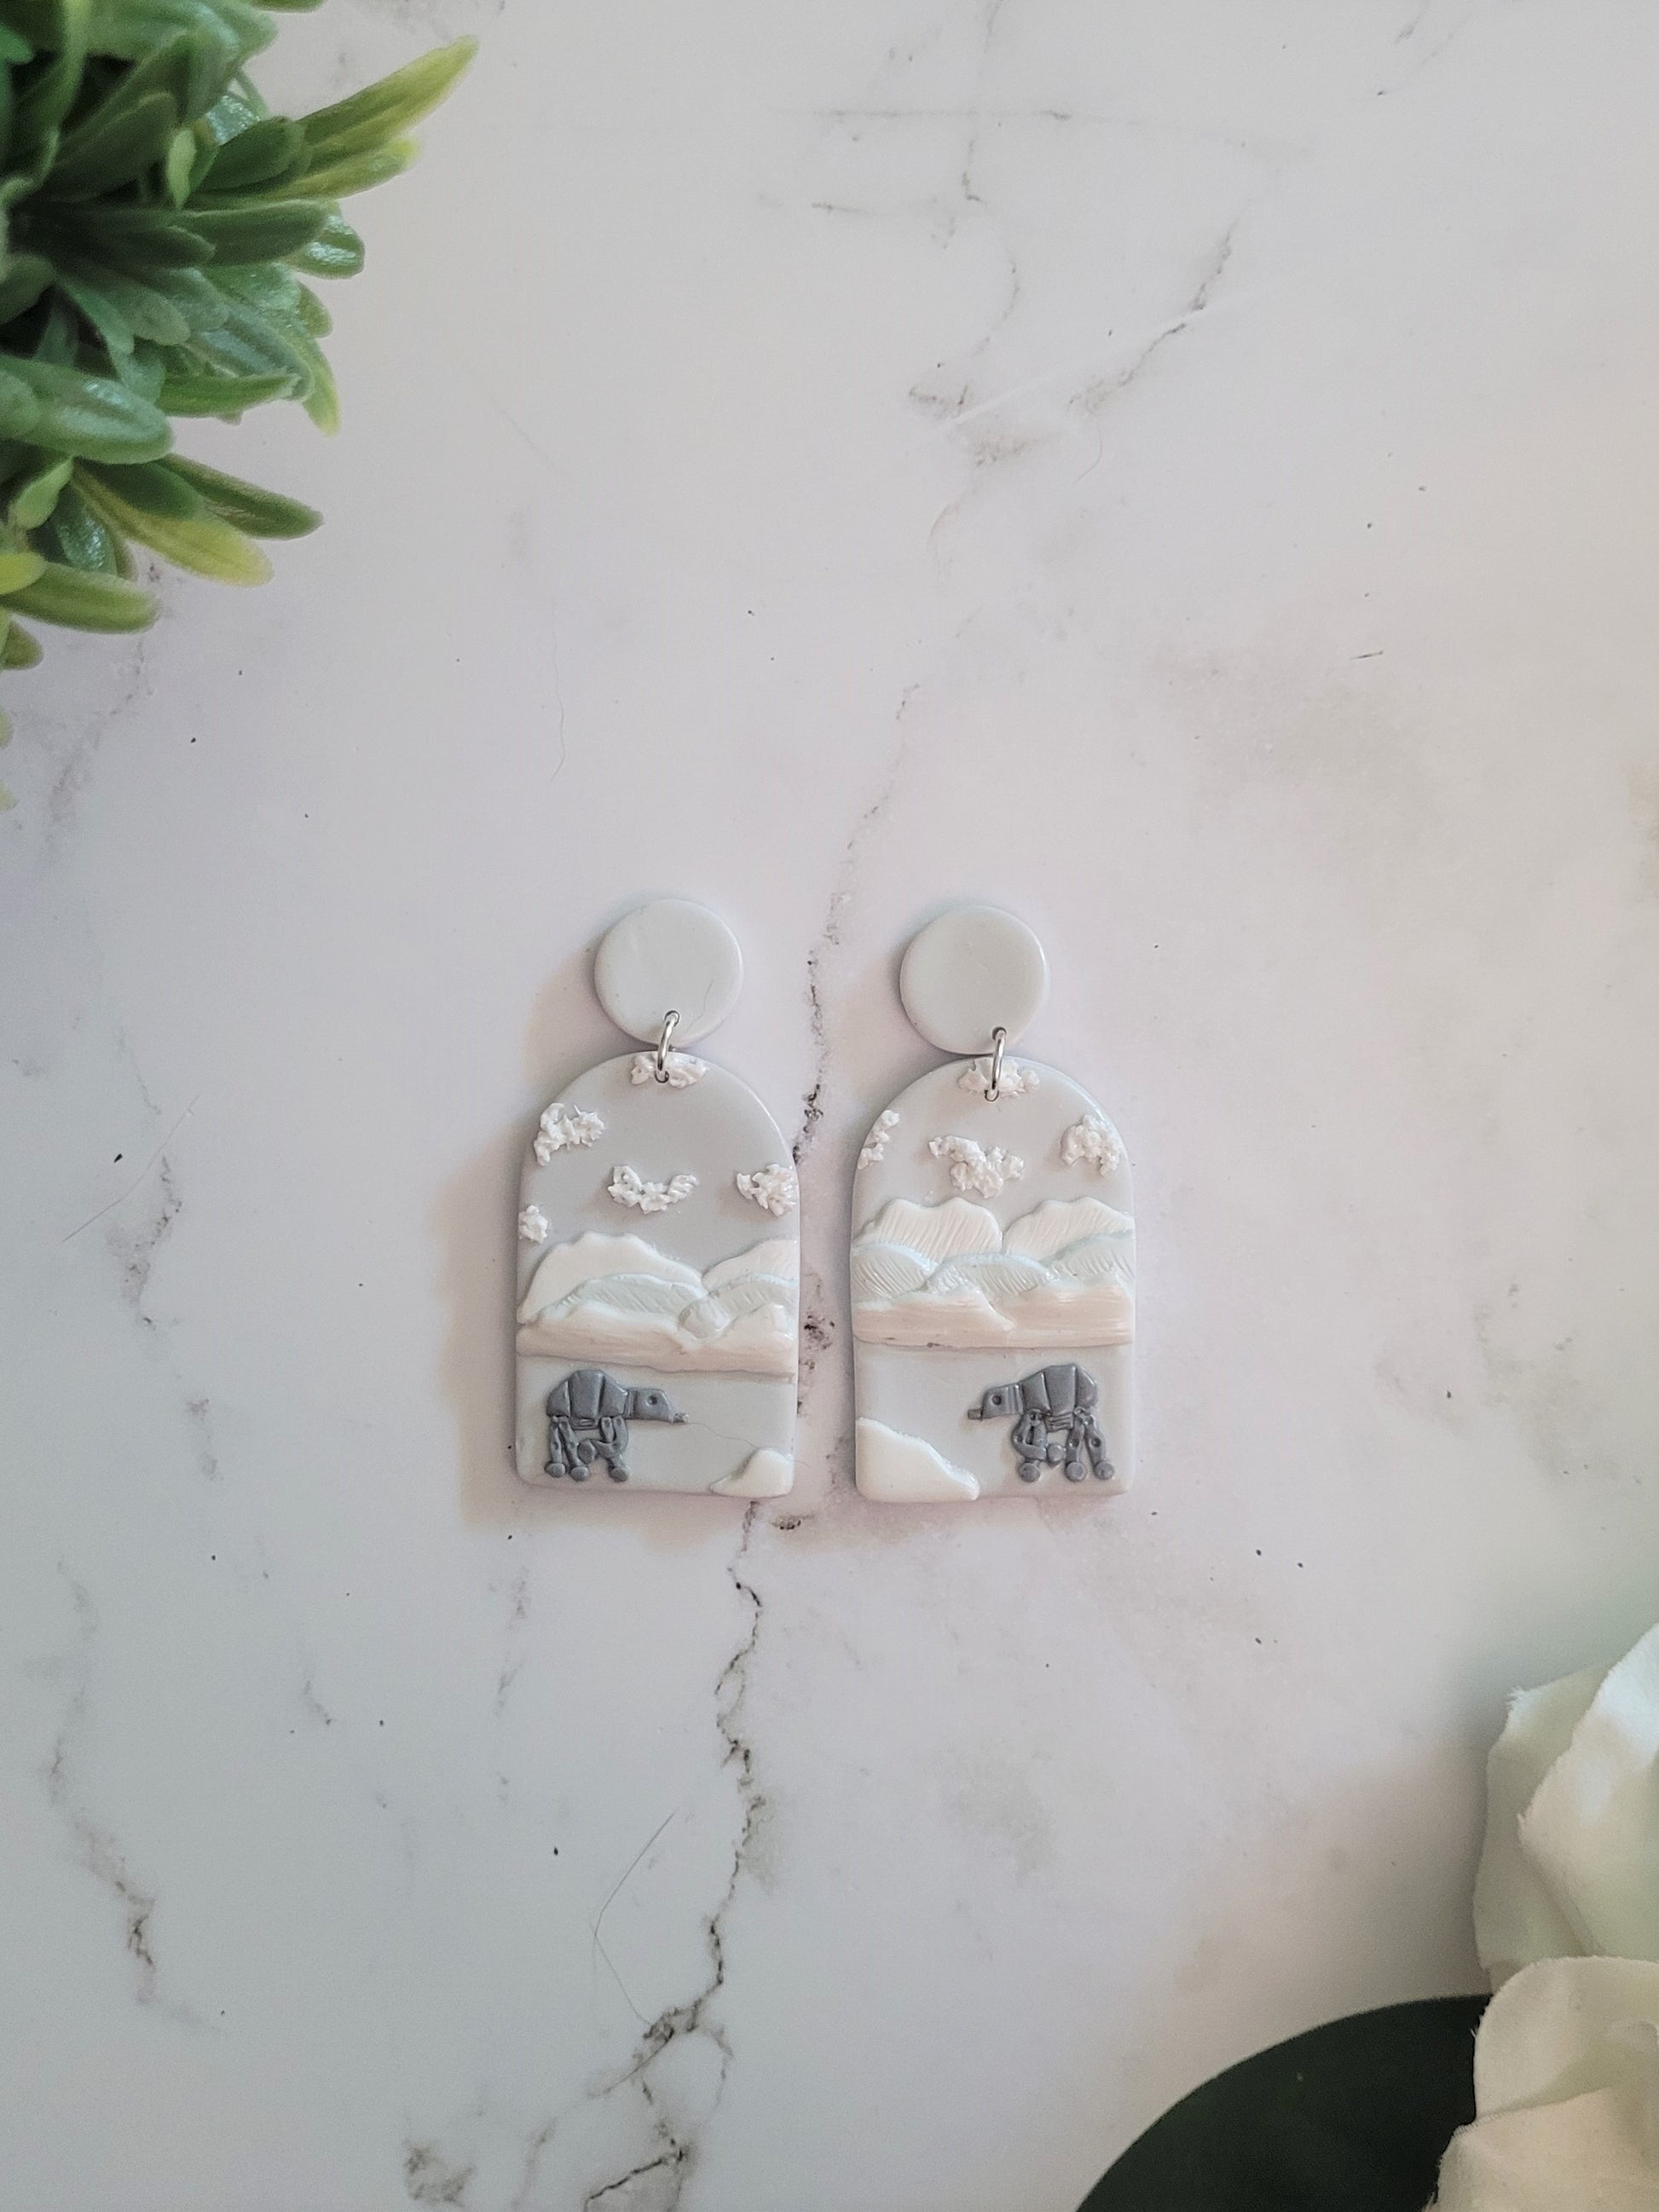 Arch earrings with a icy landscape